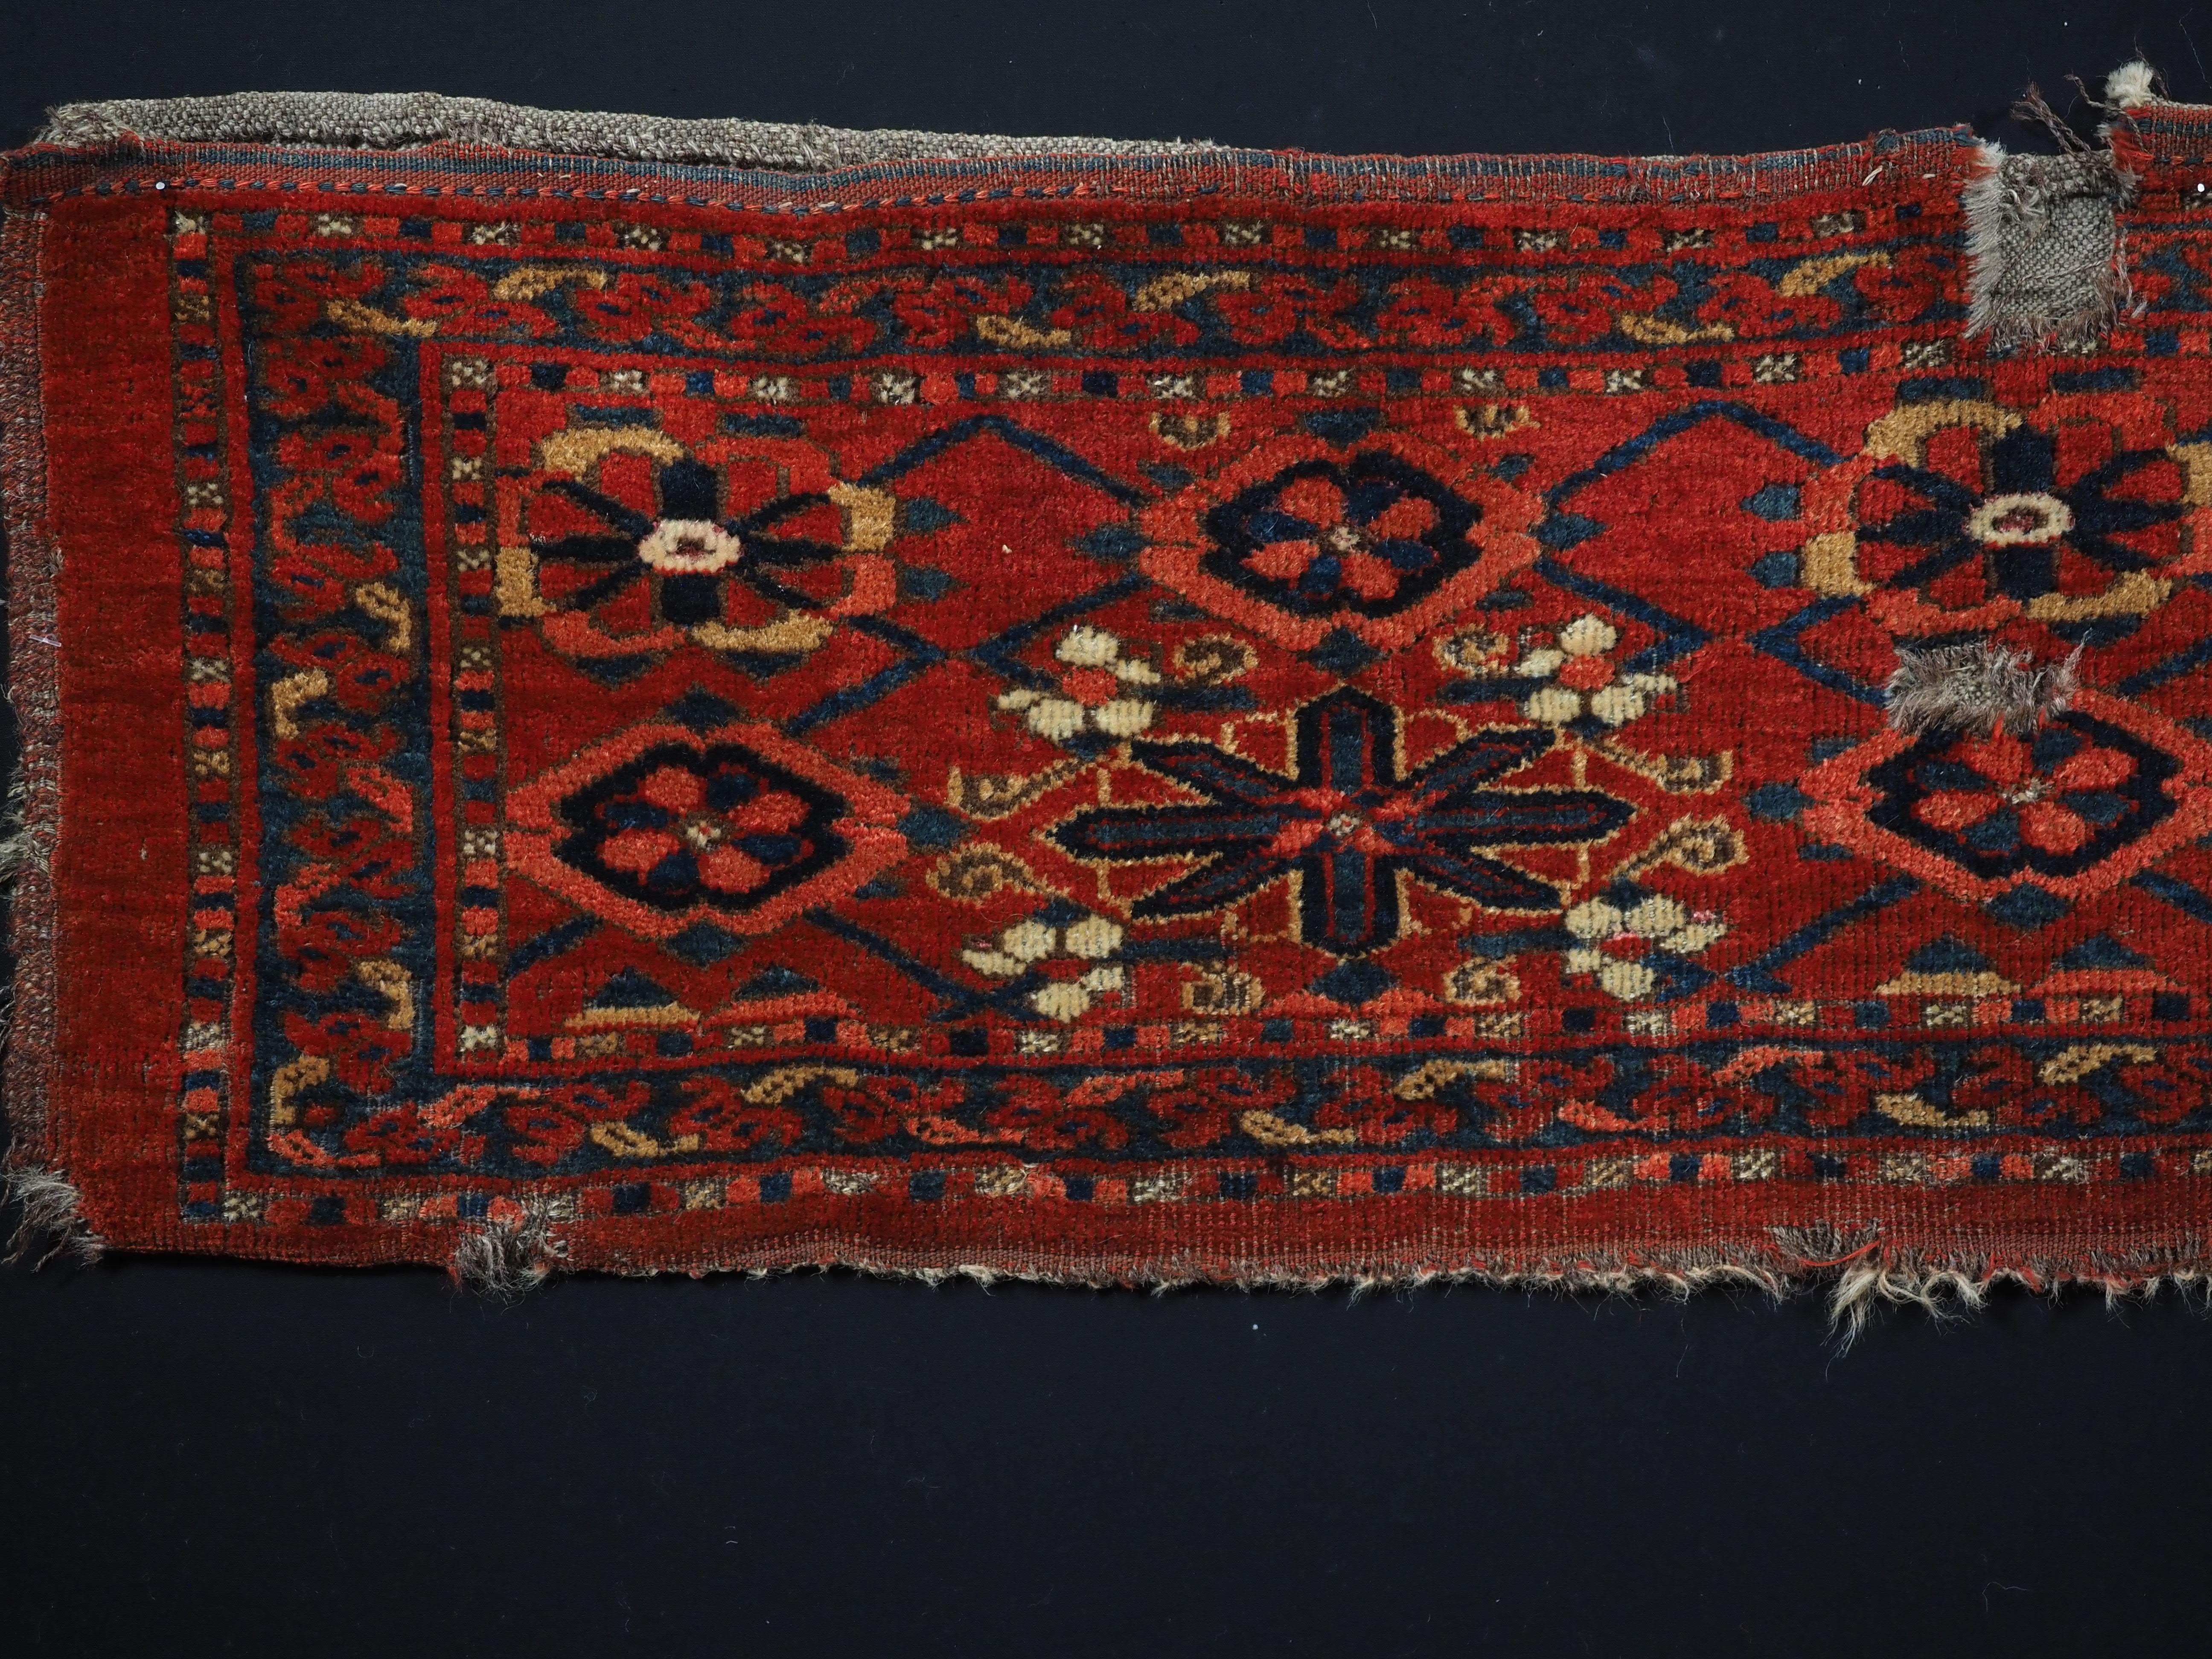 Size: 3ft 10in x 1ft 1in (117 x 34cm)

Antique Ersari Beshir Turkmen torba with mina khani design.

Circa 1870.

Torba are shallow wall bags used mainly in tents or yurts for the storage of personal belongings, they were also used to decorate the